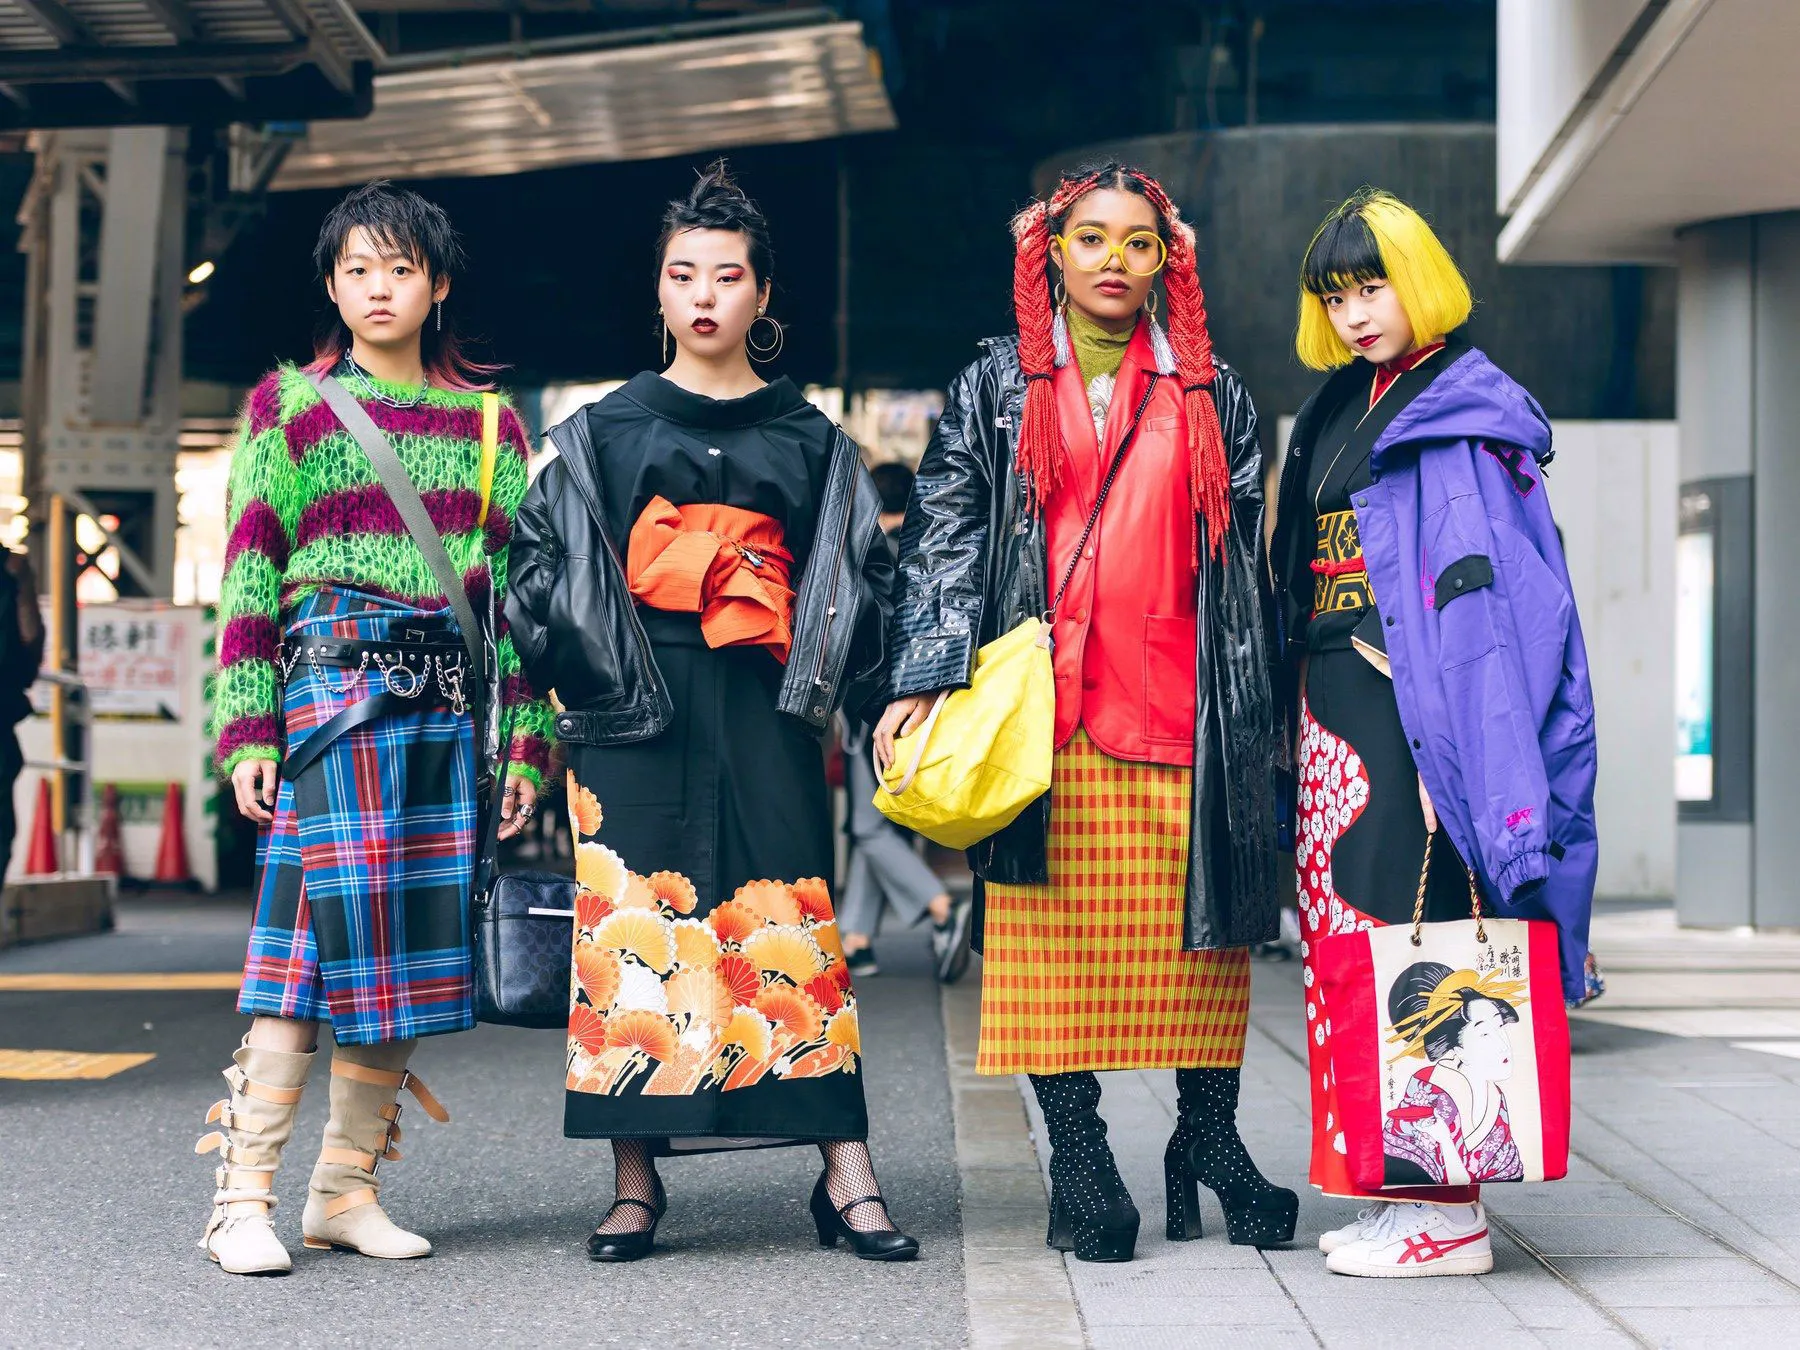 “Grit and Glam: Street Fashion Evolution Reflects Urban Diversity”